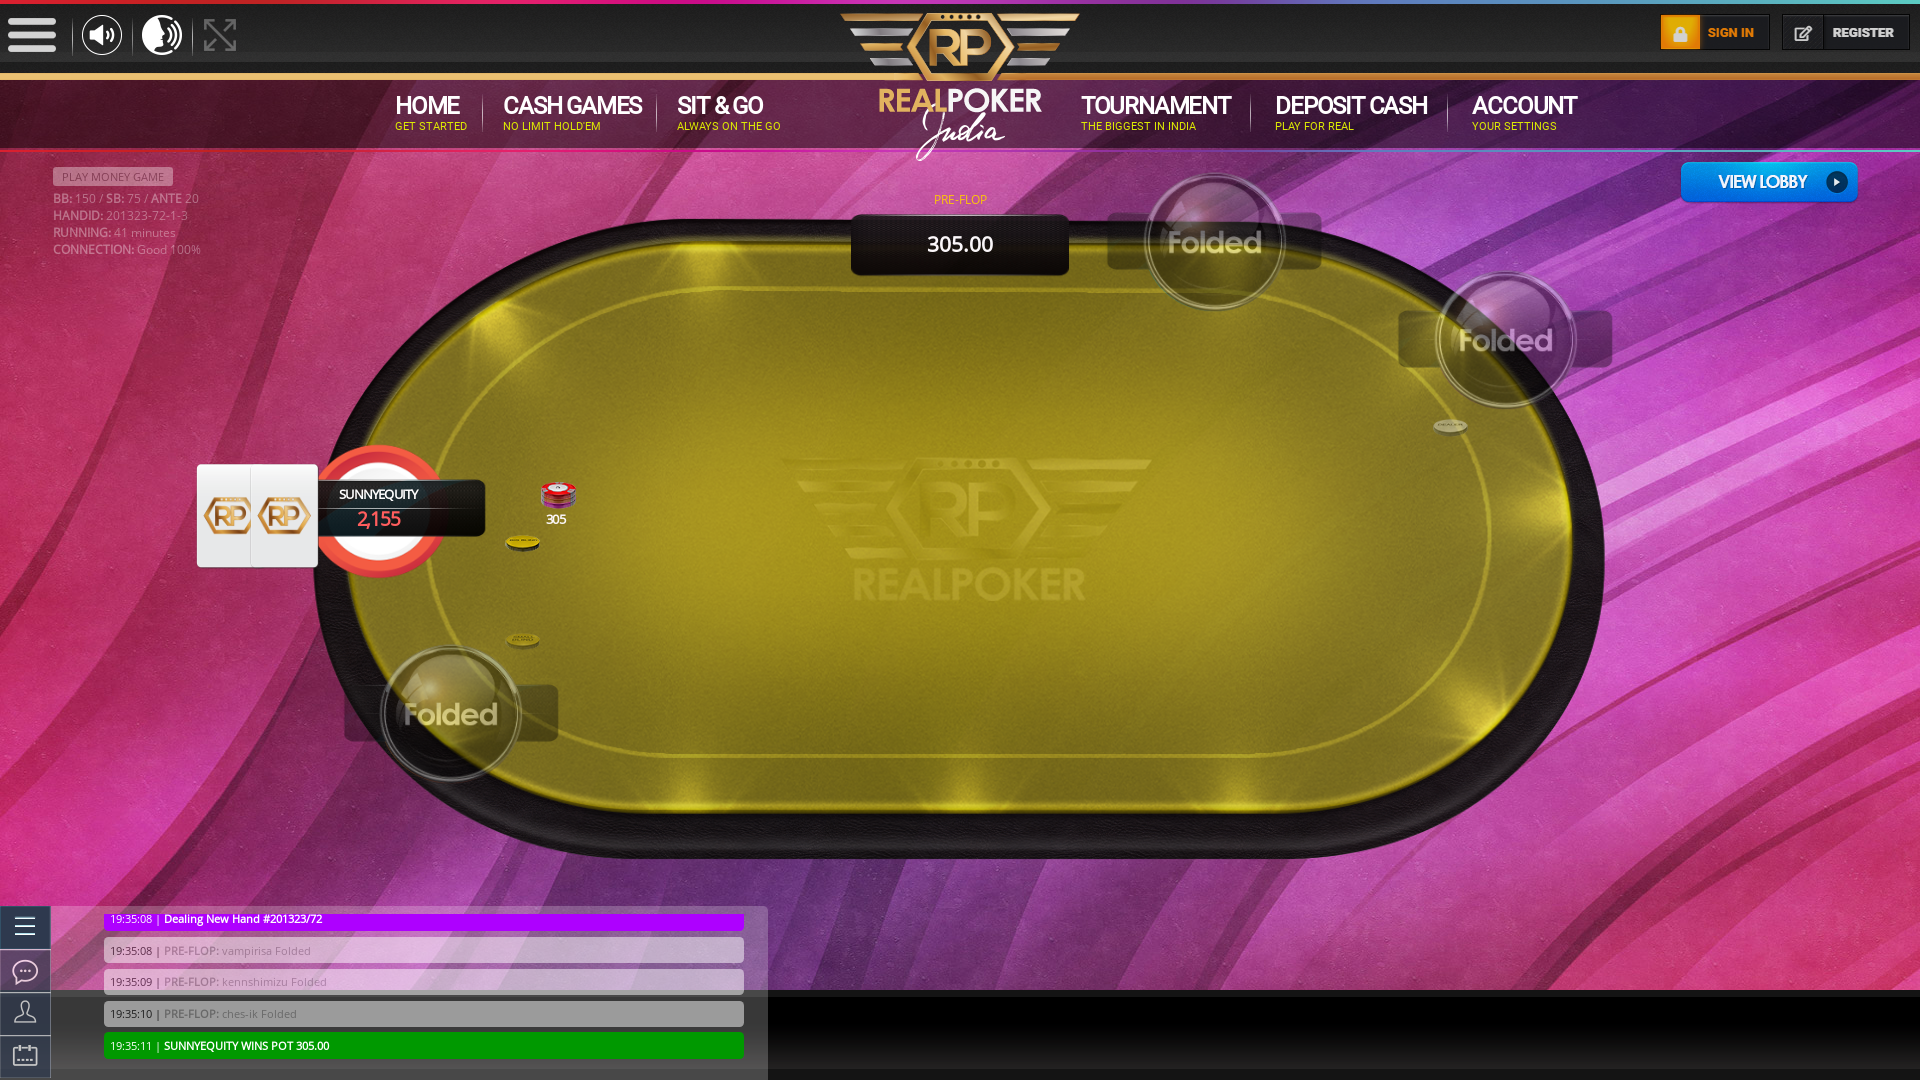 Online poker on a 10 player table in the 41st minute match up